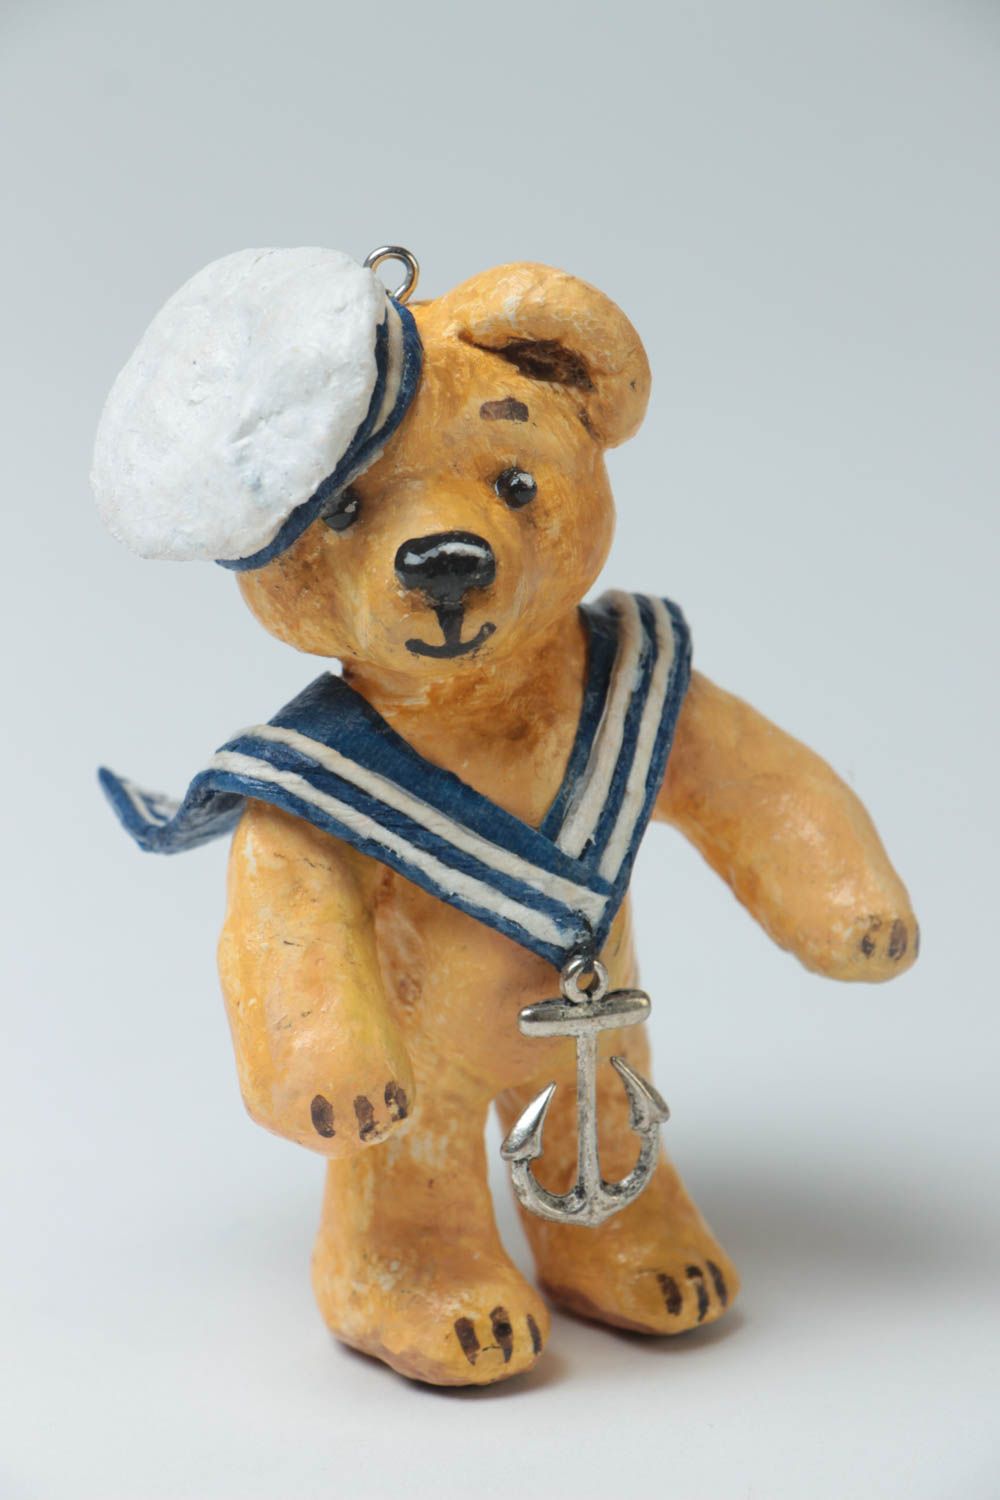 Handmade interior paper mache wall hanging painted with watercolors bear sailor photo 2